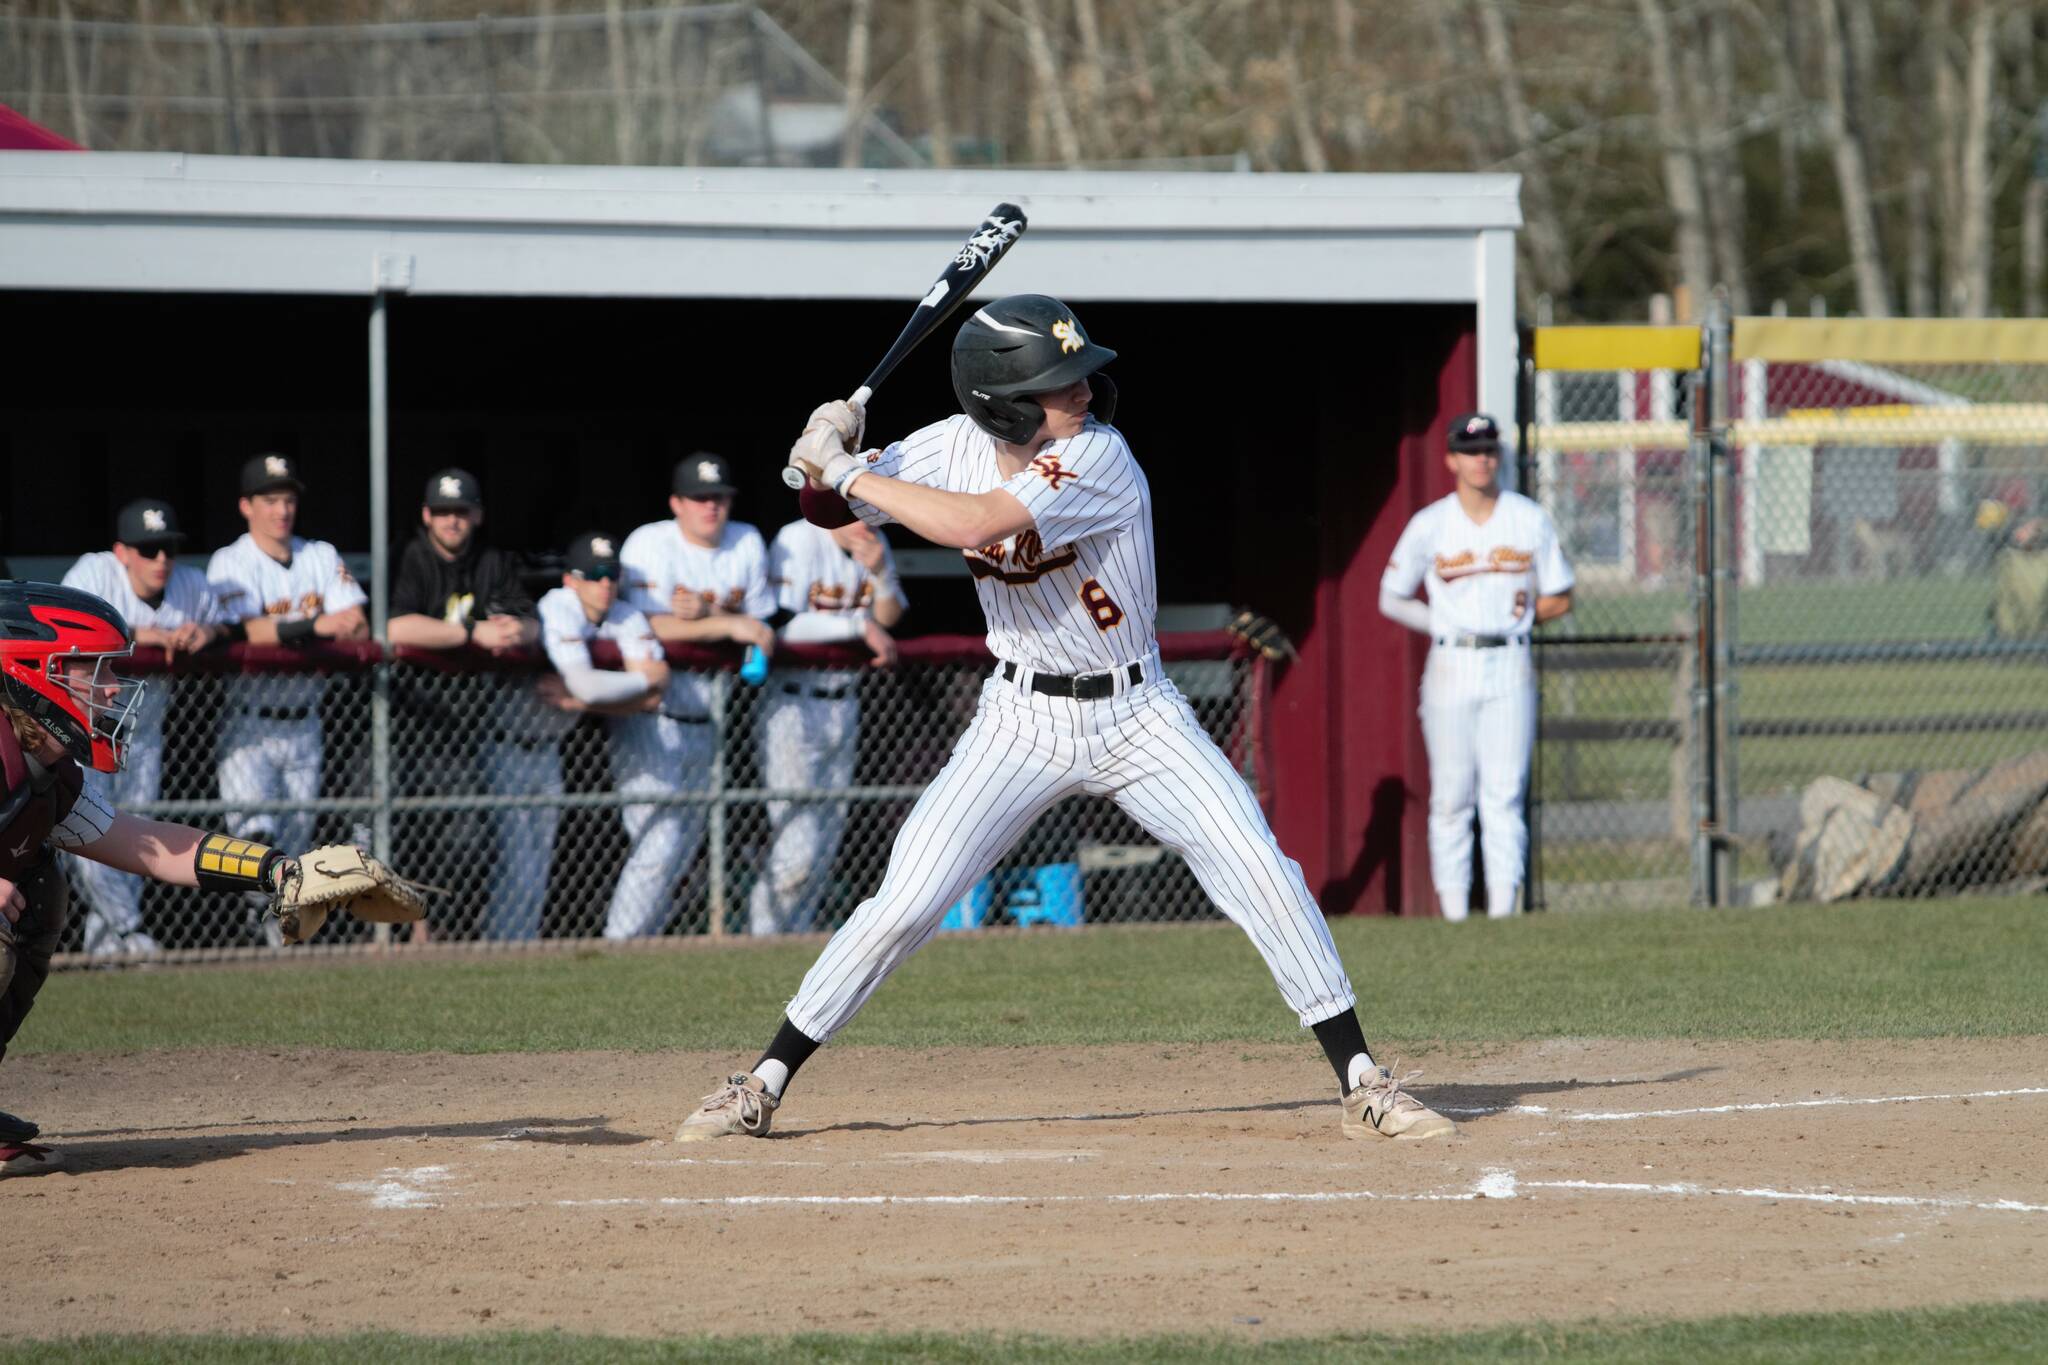 Senior Braydon Olson loads up on a swing that would provide the Wolves with their first run of the game. Elisha Meyer/Kitsap News Group Photos